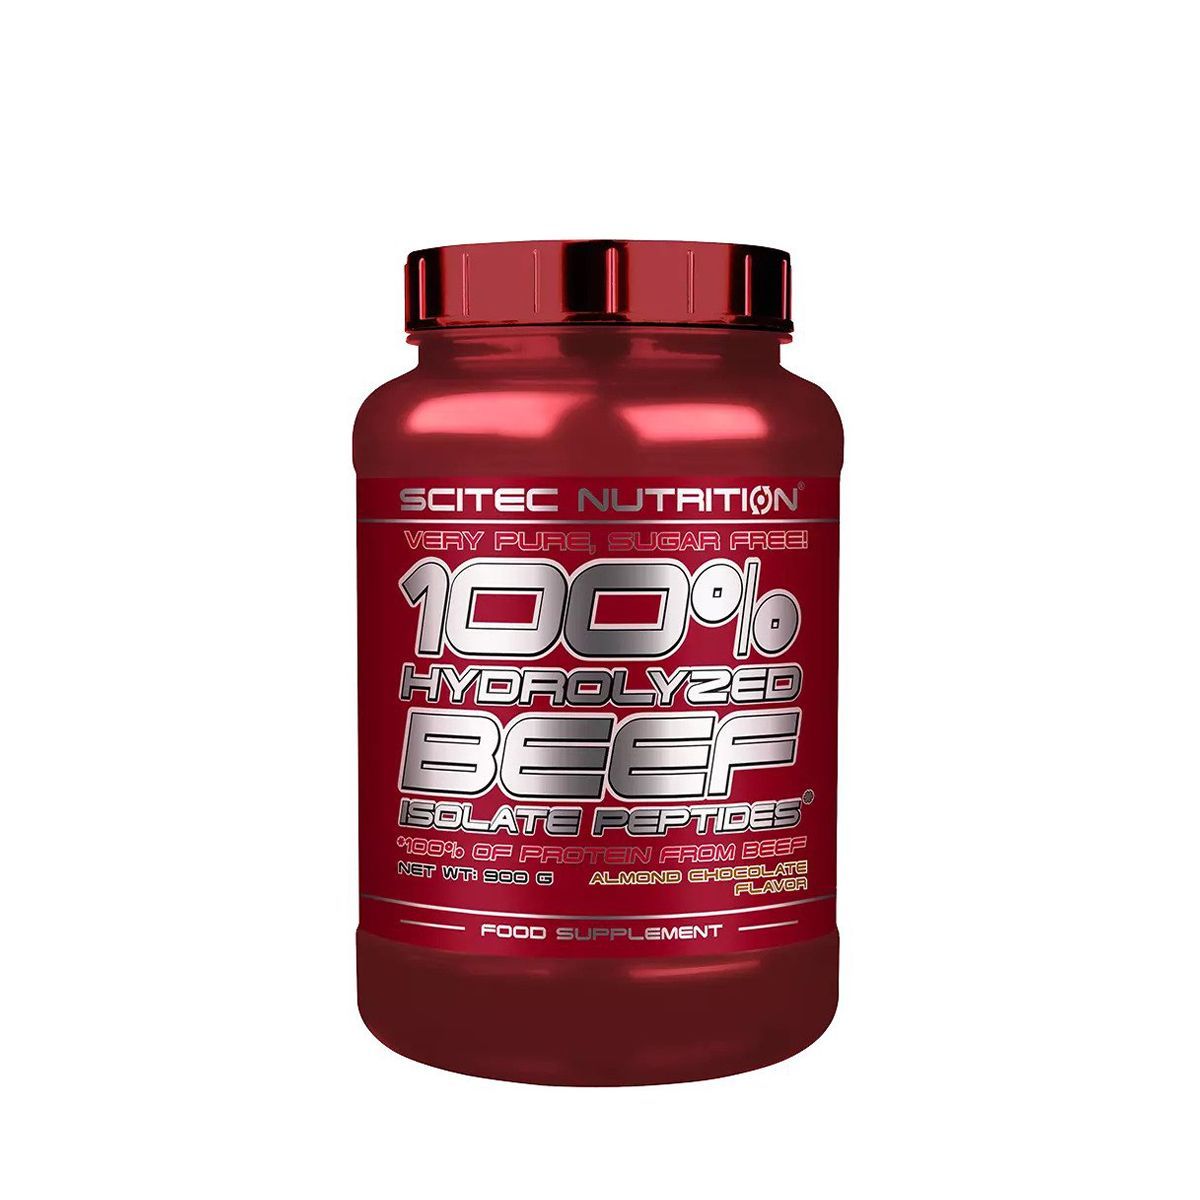 Scitec Nutrition - 100% Hydrolyzed Beef Isolate Peptides - 900g